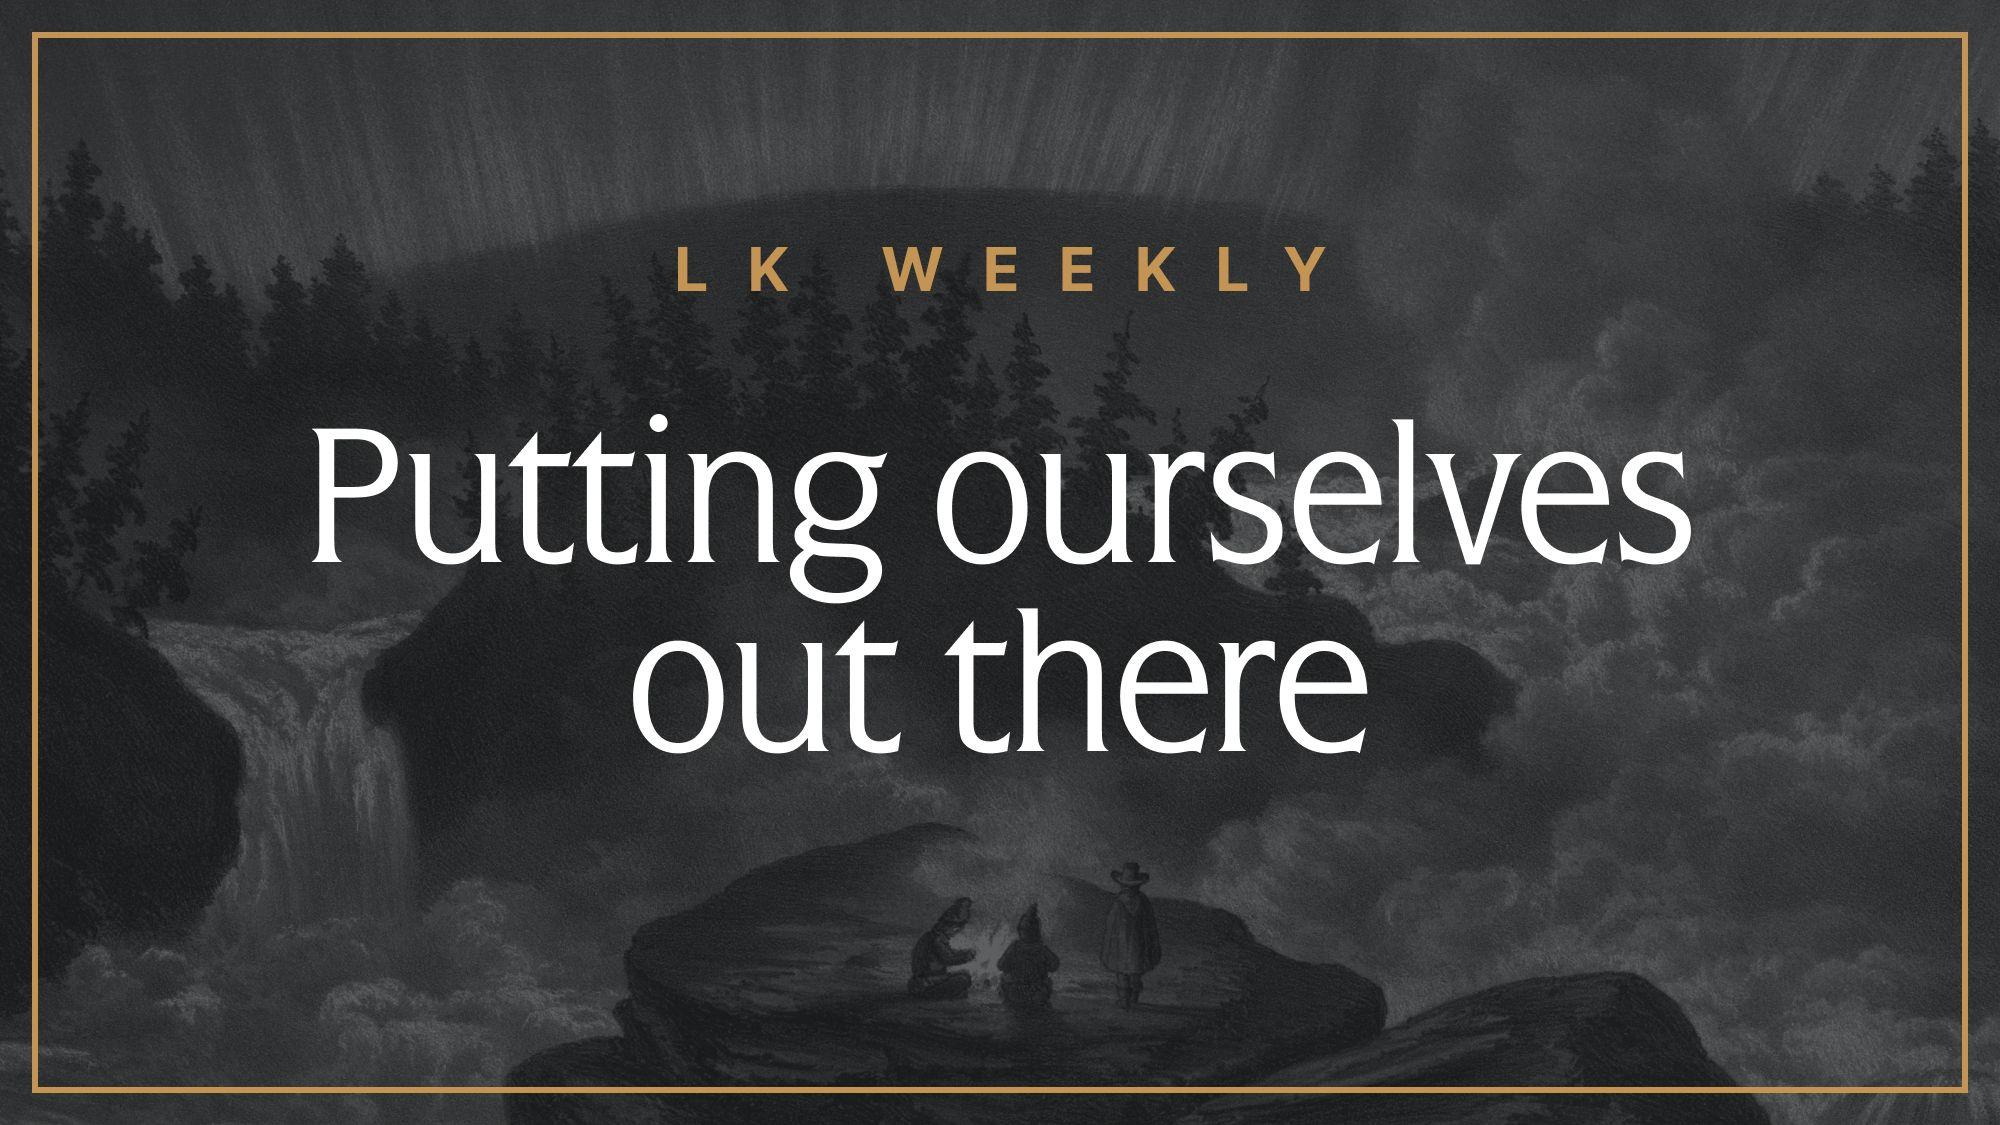 Feature image for LK Weekly: Putting ourselves out there